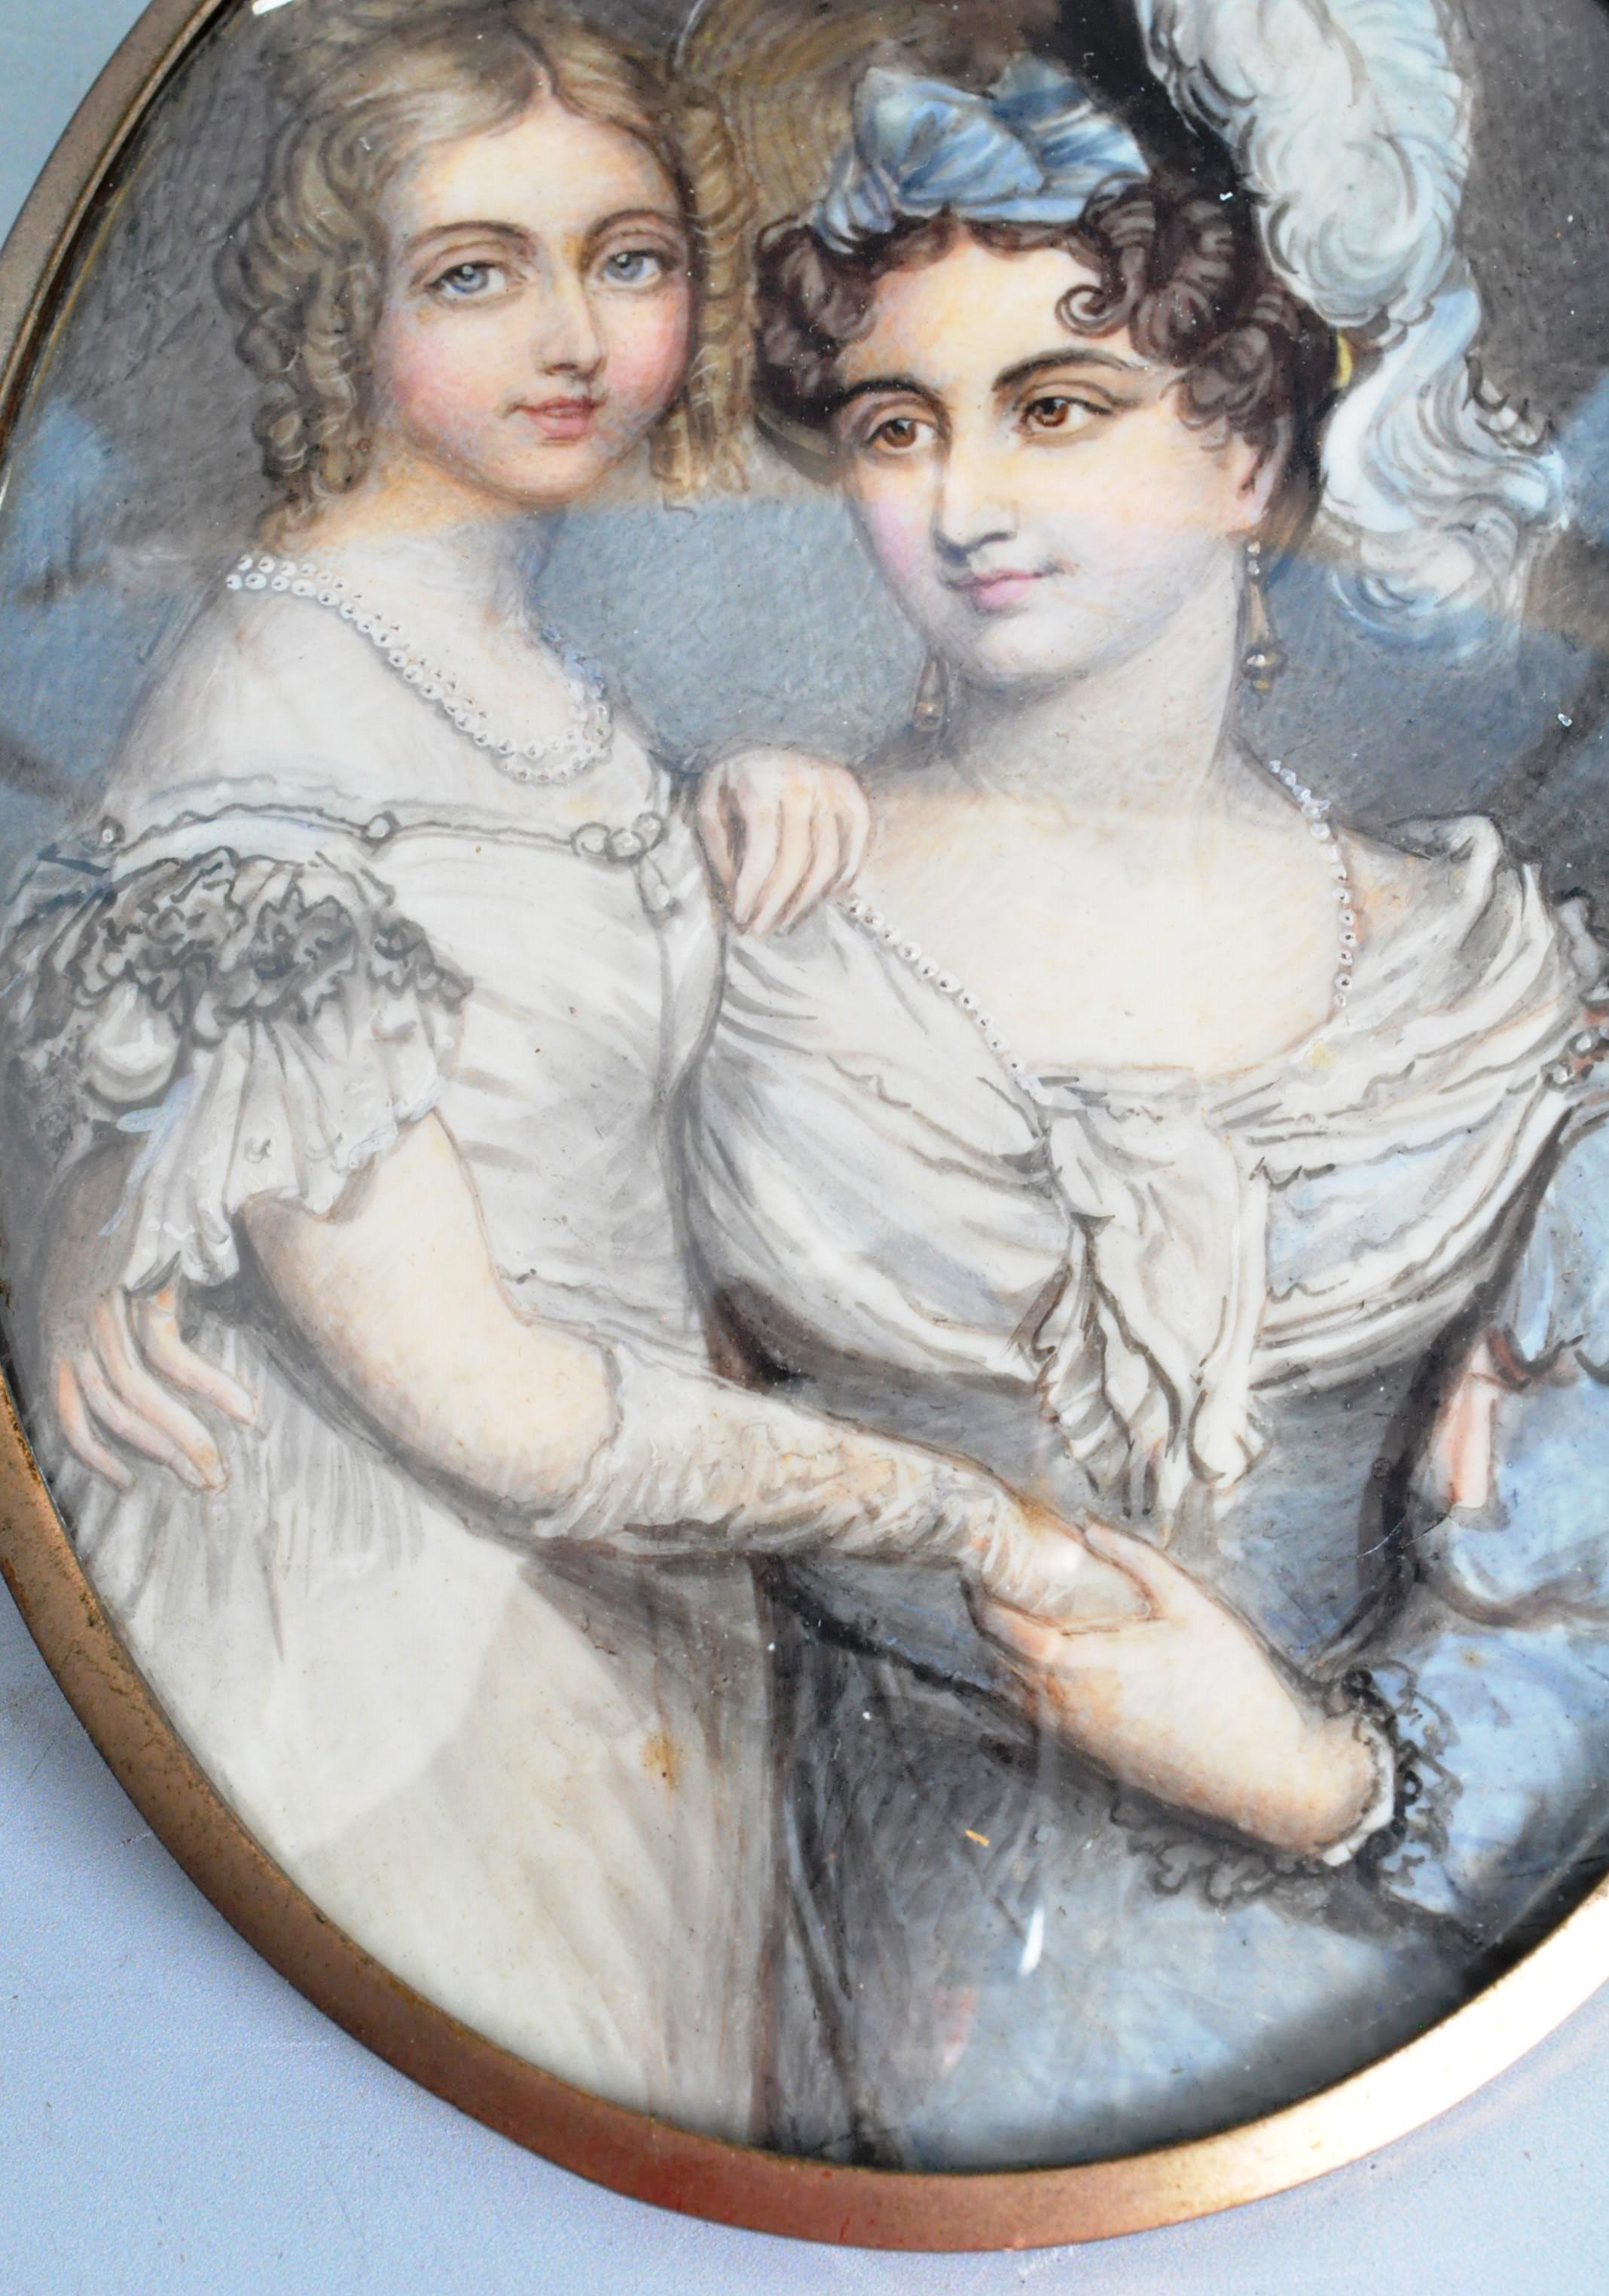 19TH CENTURY VICTORIAN OVAL PORTRAIT MINIATURE PAINTING - Image 3 of 4